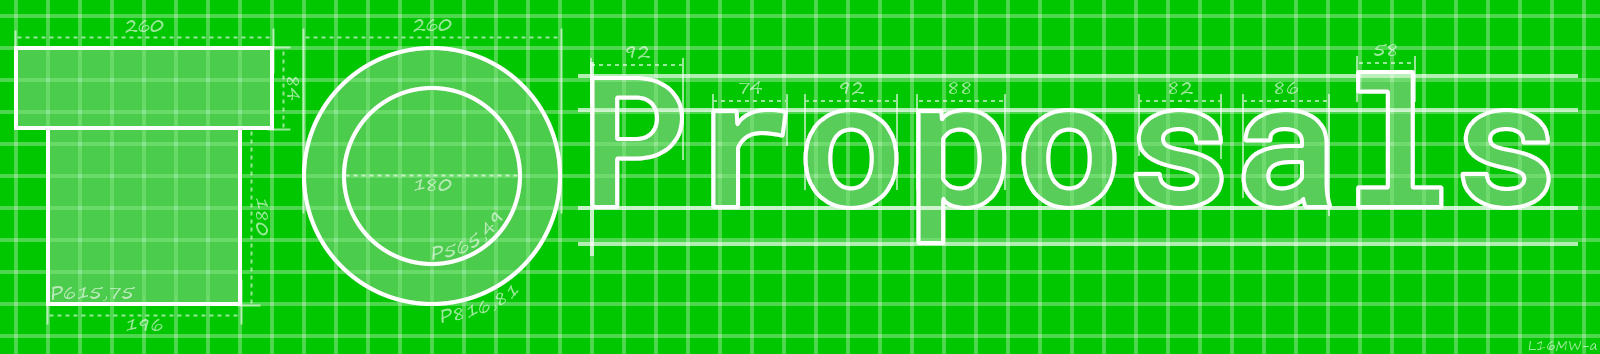 proposalsFull.0.1.png